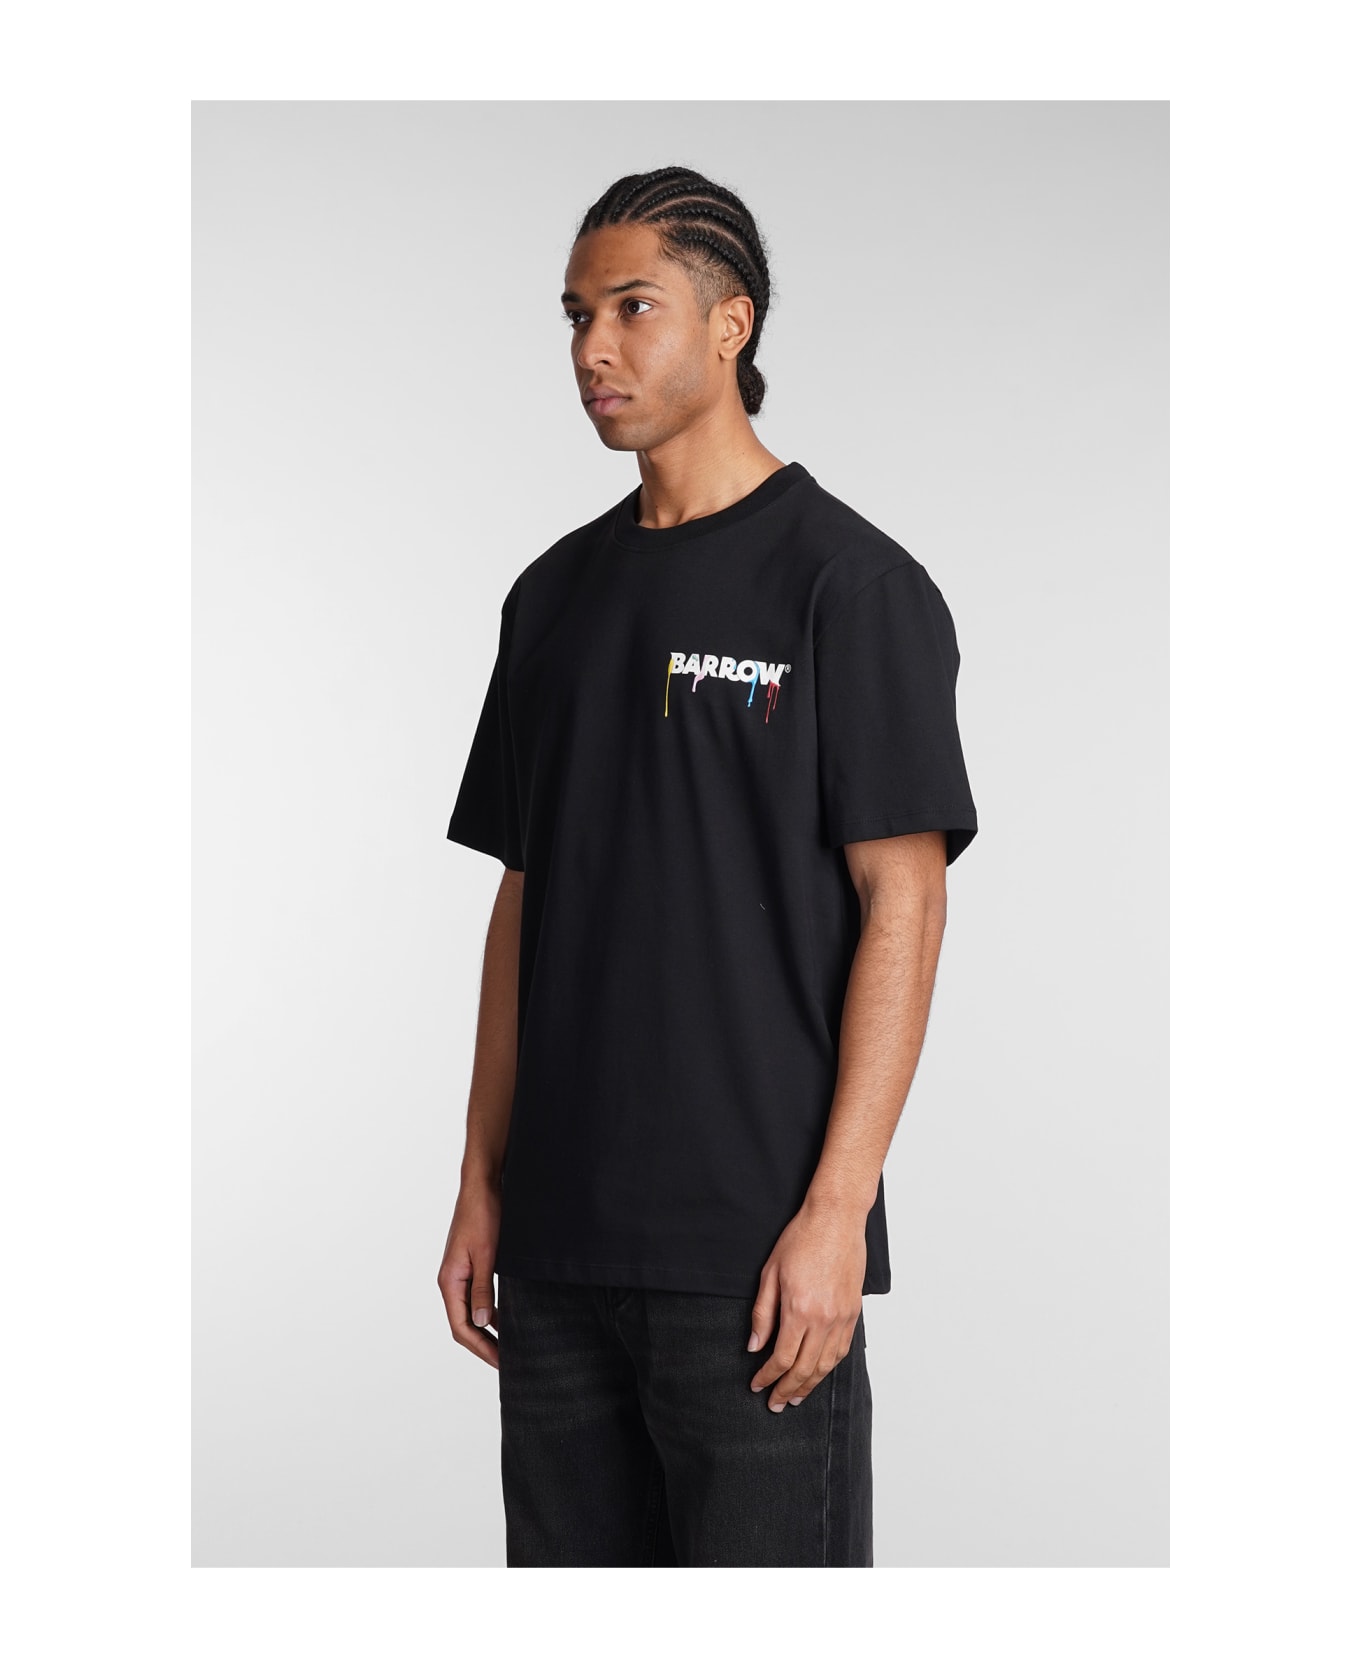 Barrow Black T-shirt With Logo And Colour Spots - Black Tシャツ